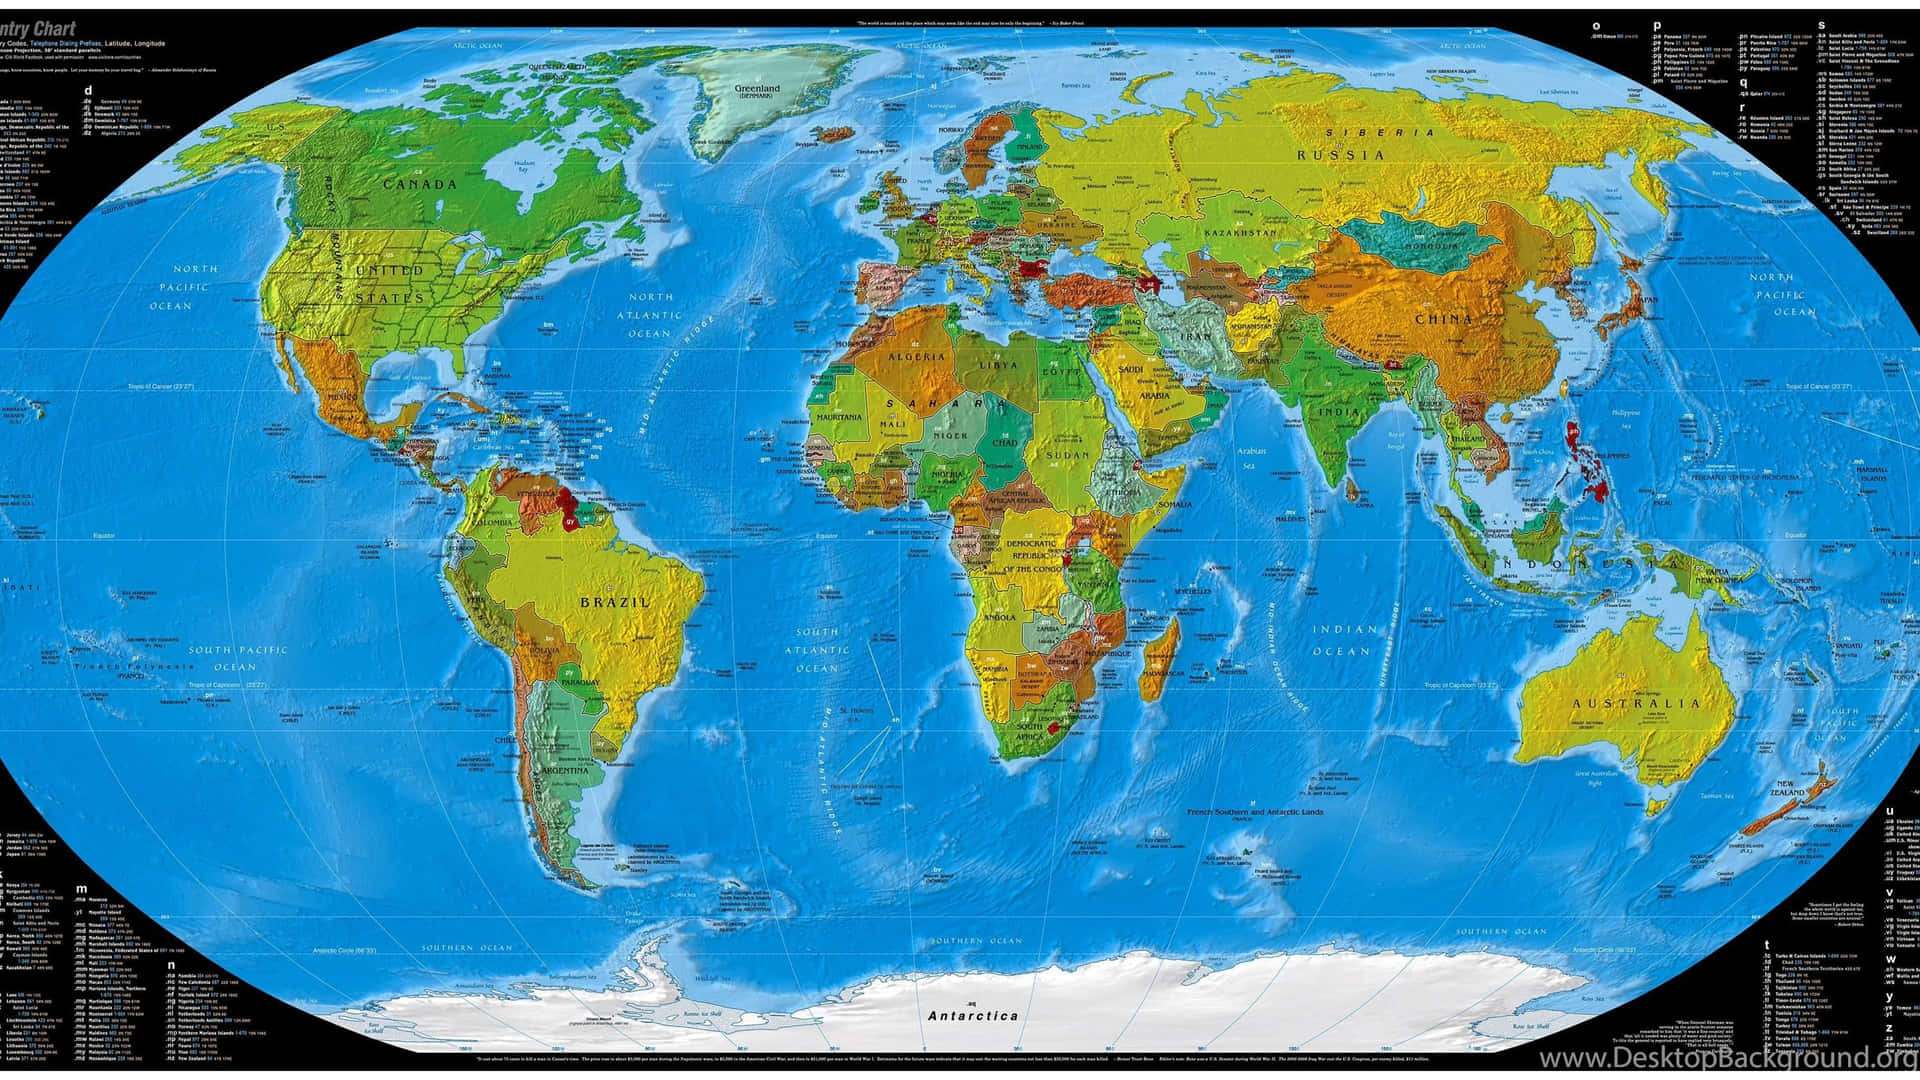 "Explore the World with this Detailed Map of Every Continent"